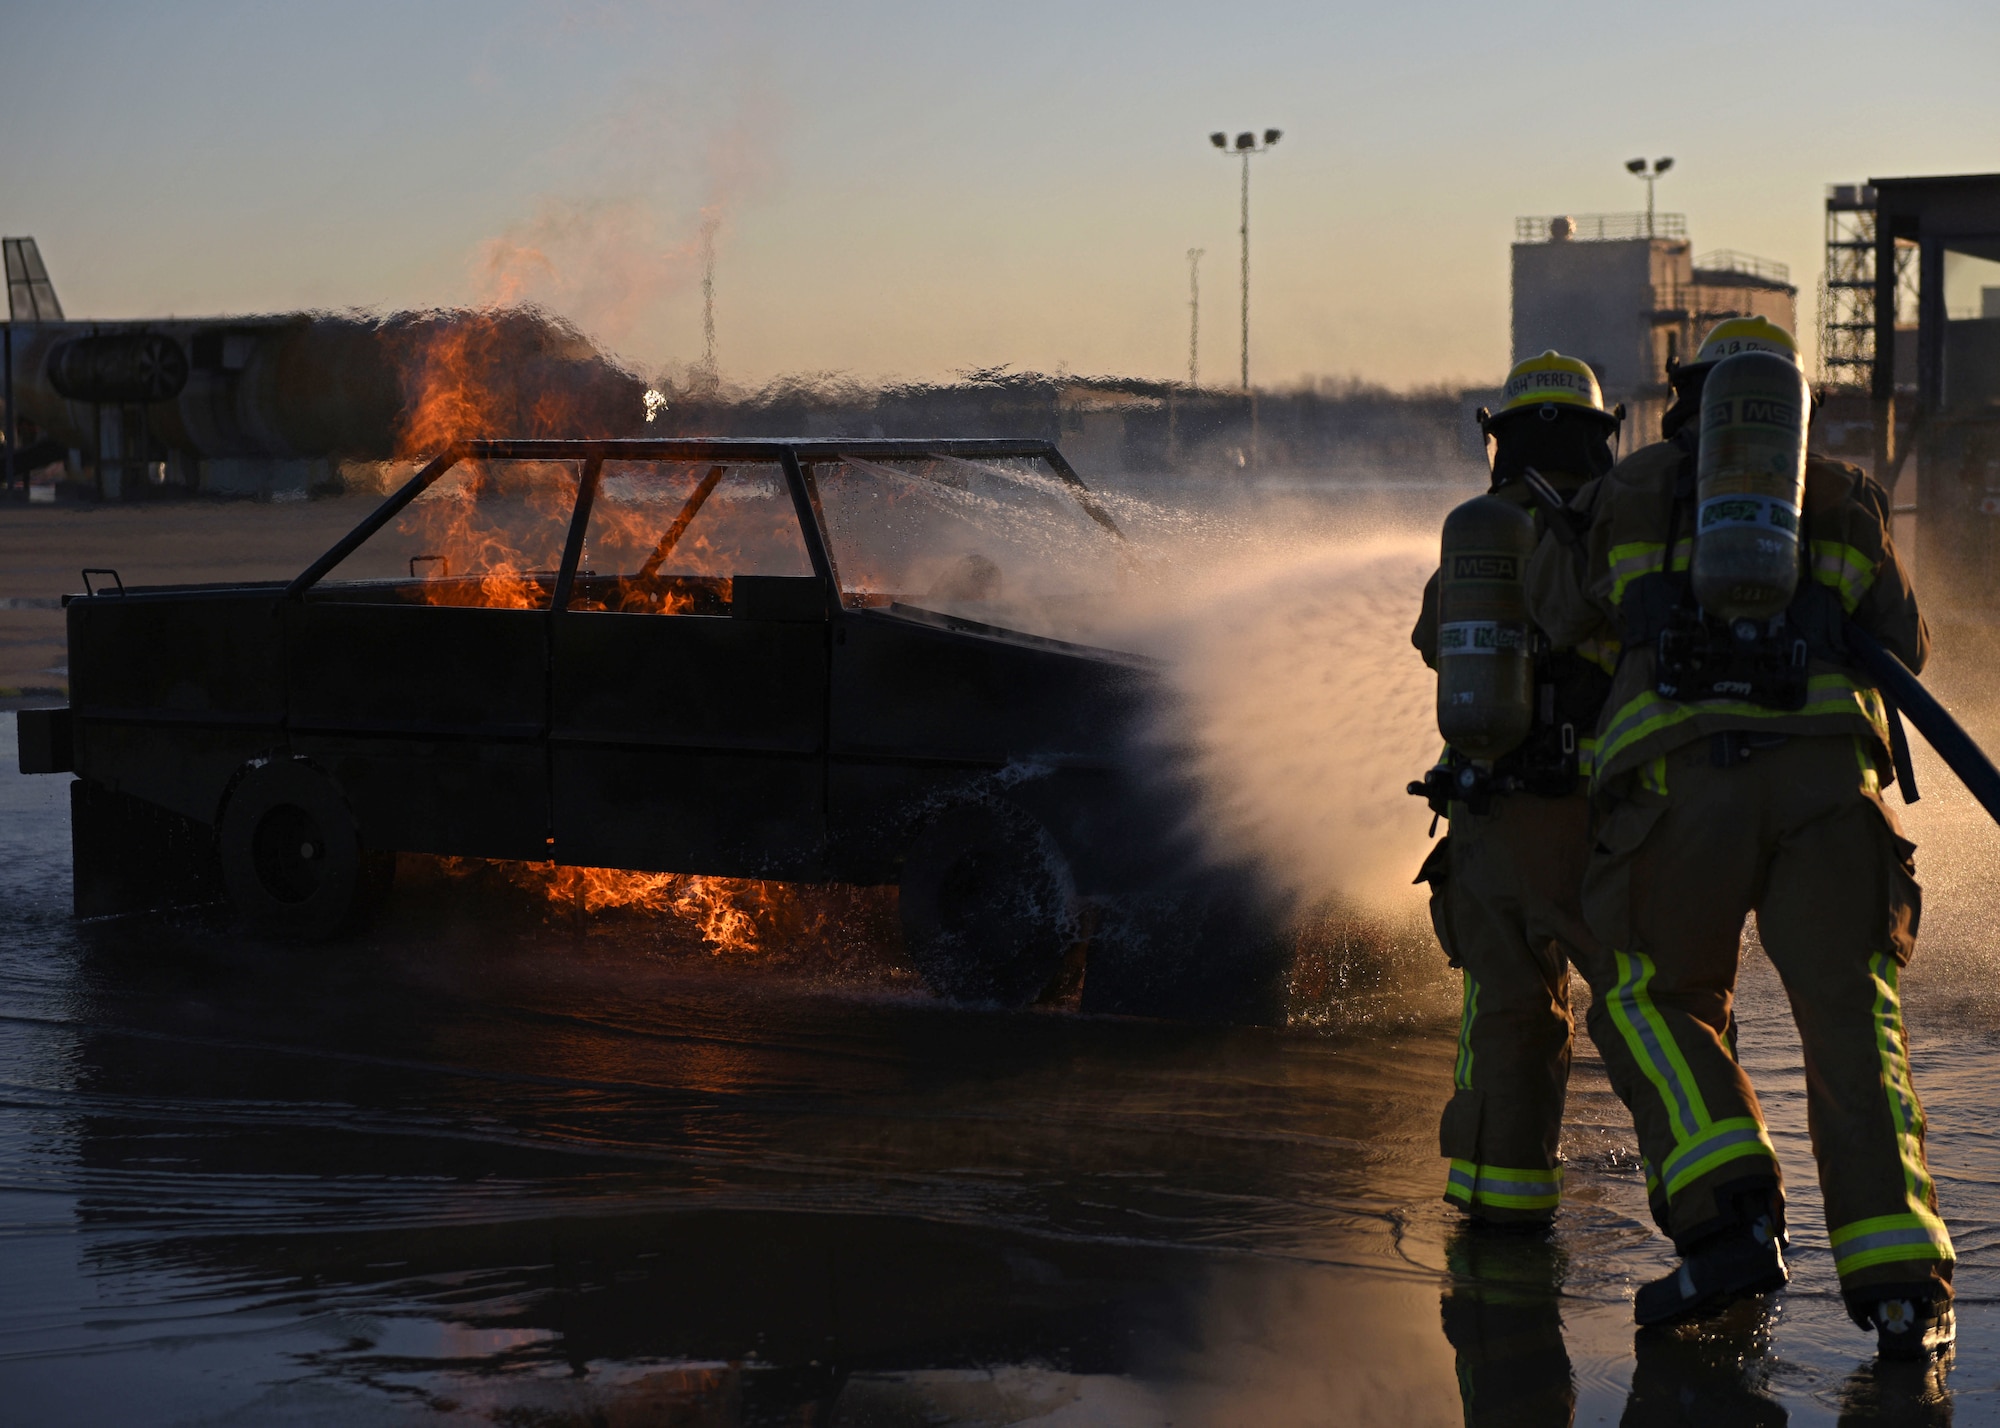 Students assigned to the 312th Training Squadron douse a vehicle fire at the Louis F. Garland Department of Defense Fire Academy, Goodfellow Air Force Base, March 9, 2022. The vehicle fire trainer is a part of the Fire Suppression block, which is taught for 20 academic days. (U.S. Air Force photo by Airman 1st Class Sarah Williams)